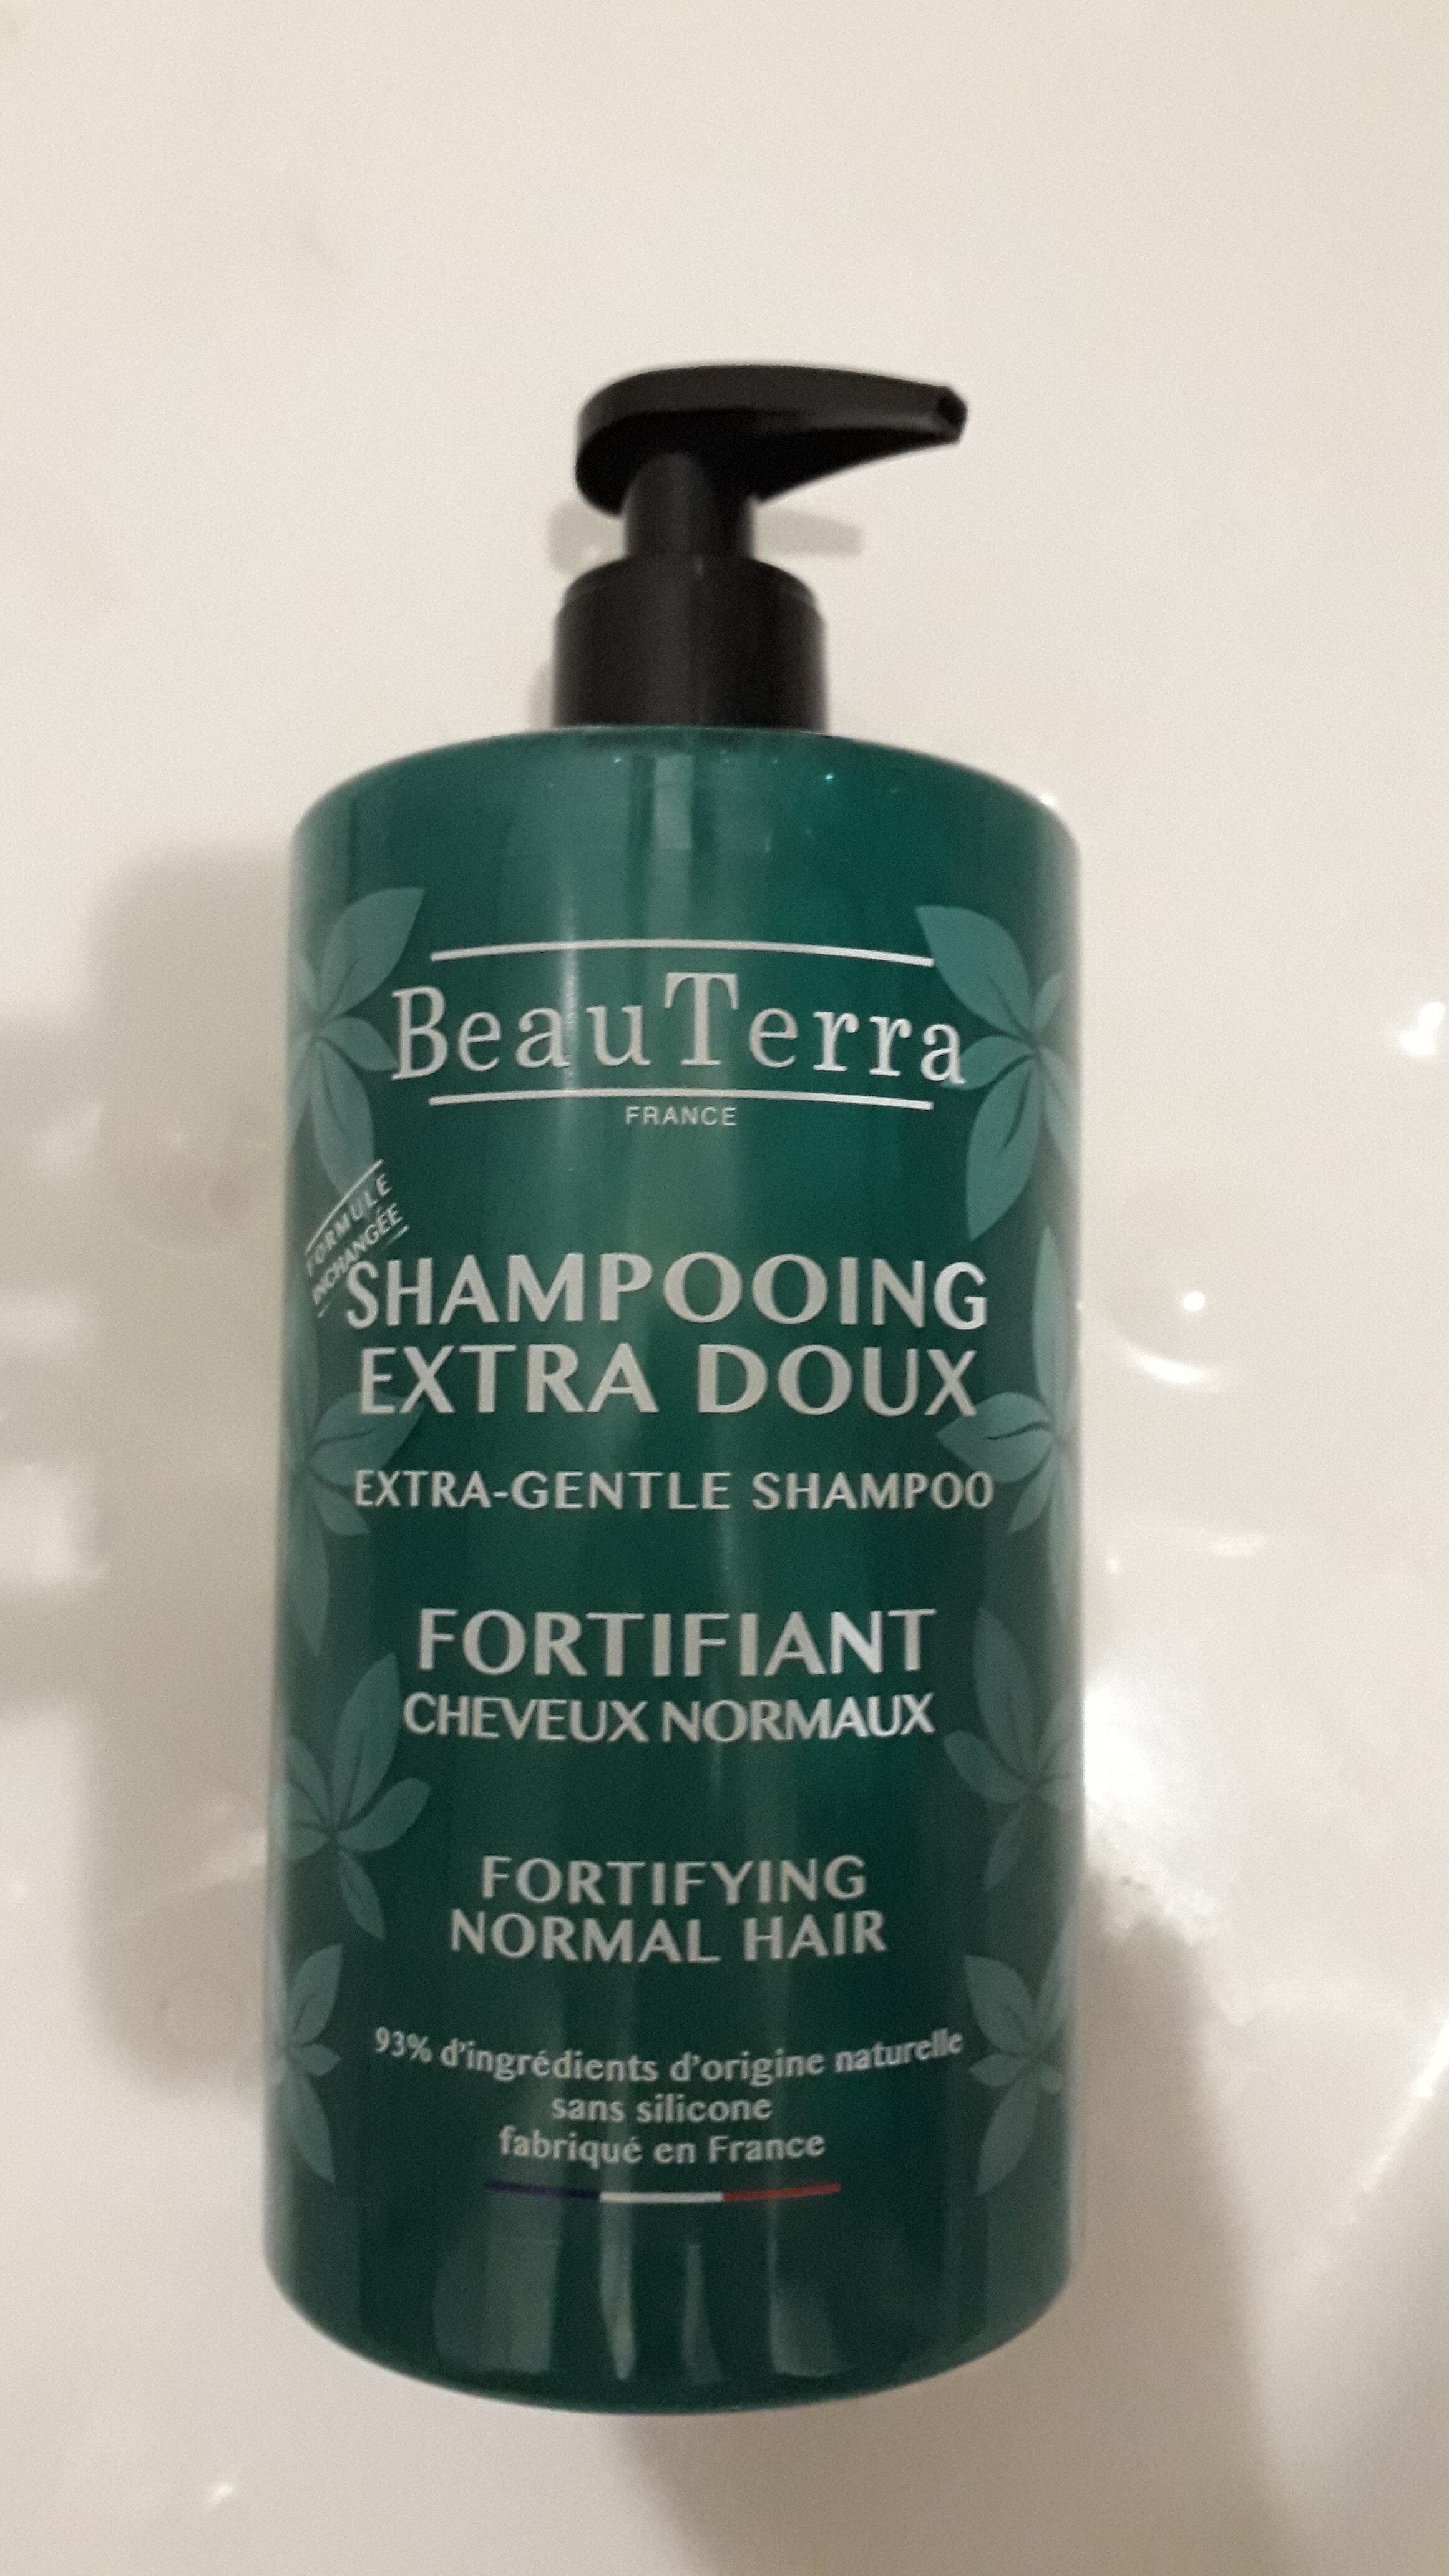 Shampoing extra doux - Tuote - fr